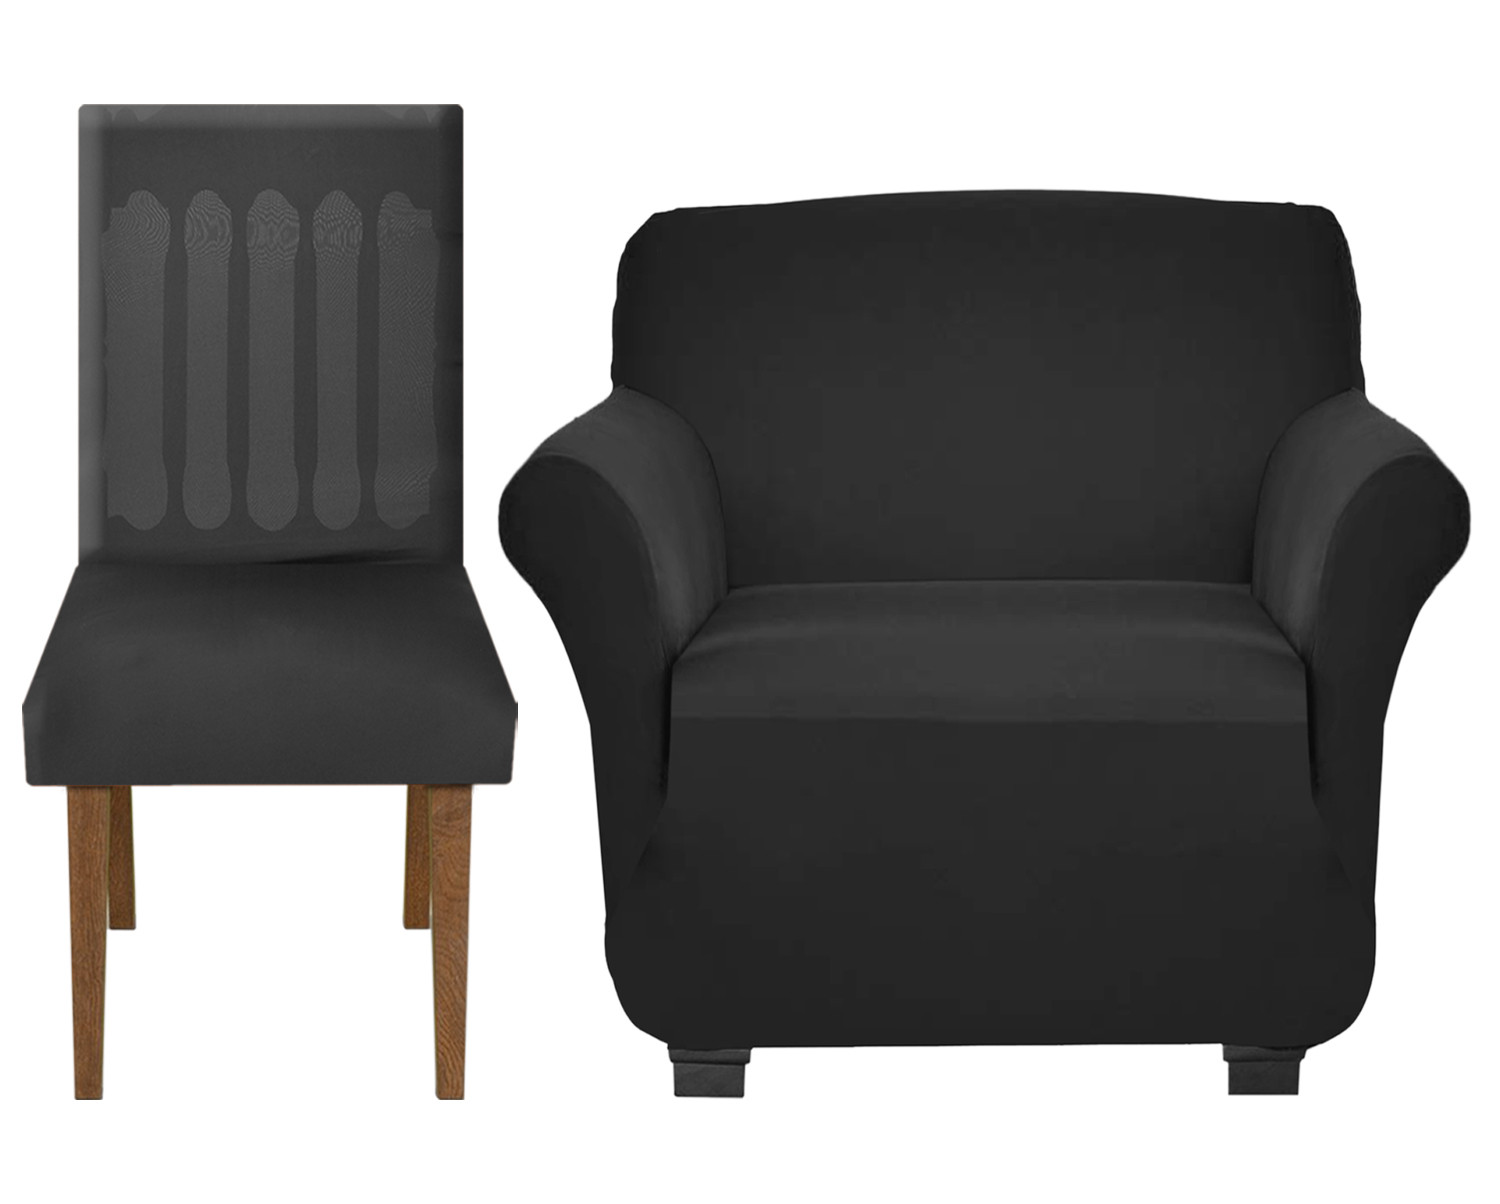 Kuber Industries Stretchable, Non-Slip Polyster 1 Seater Sofa & Chair Cover Set, Set of 2 (Black)